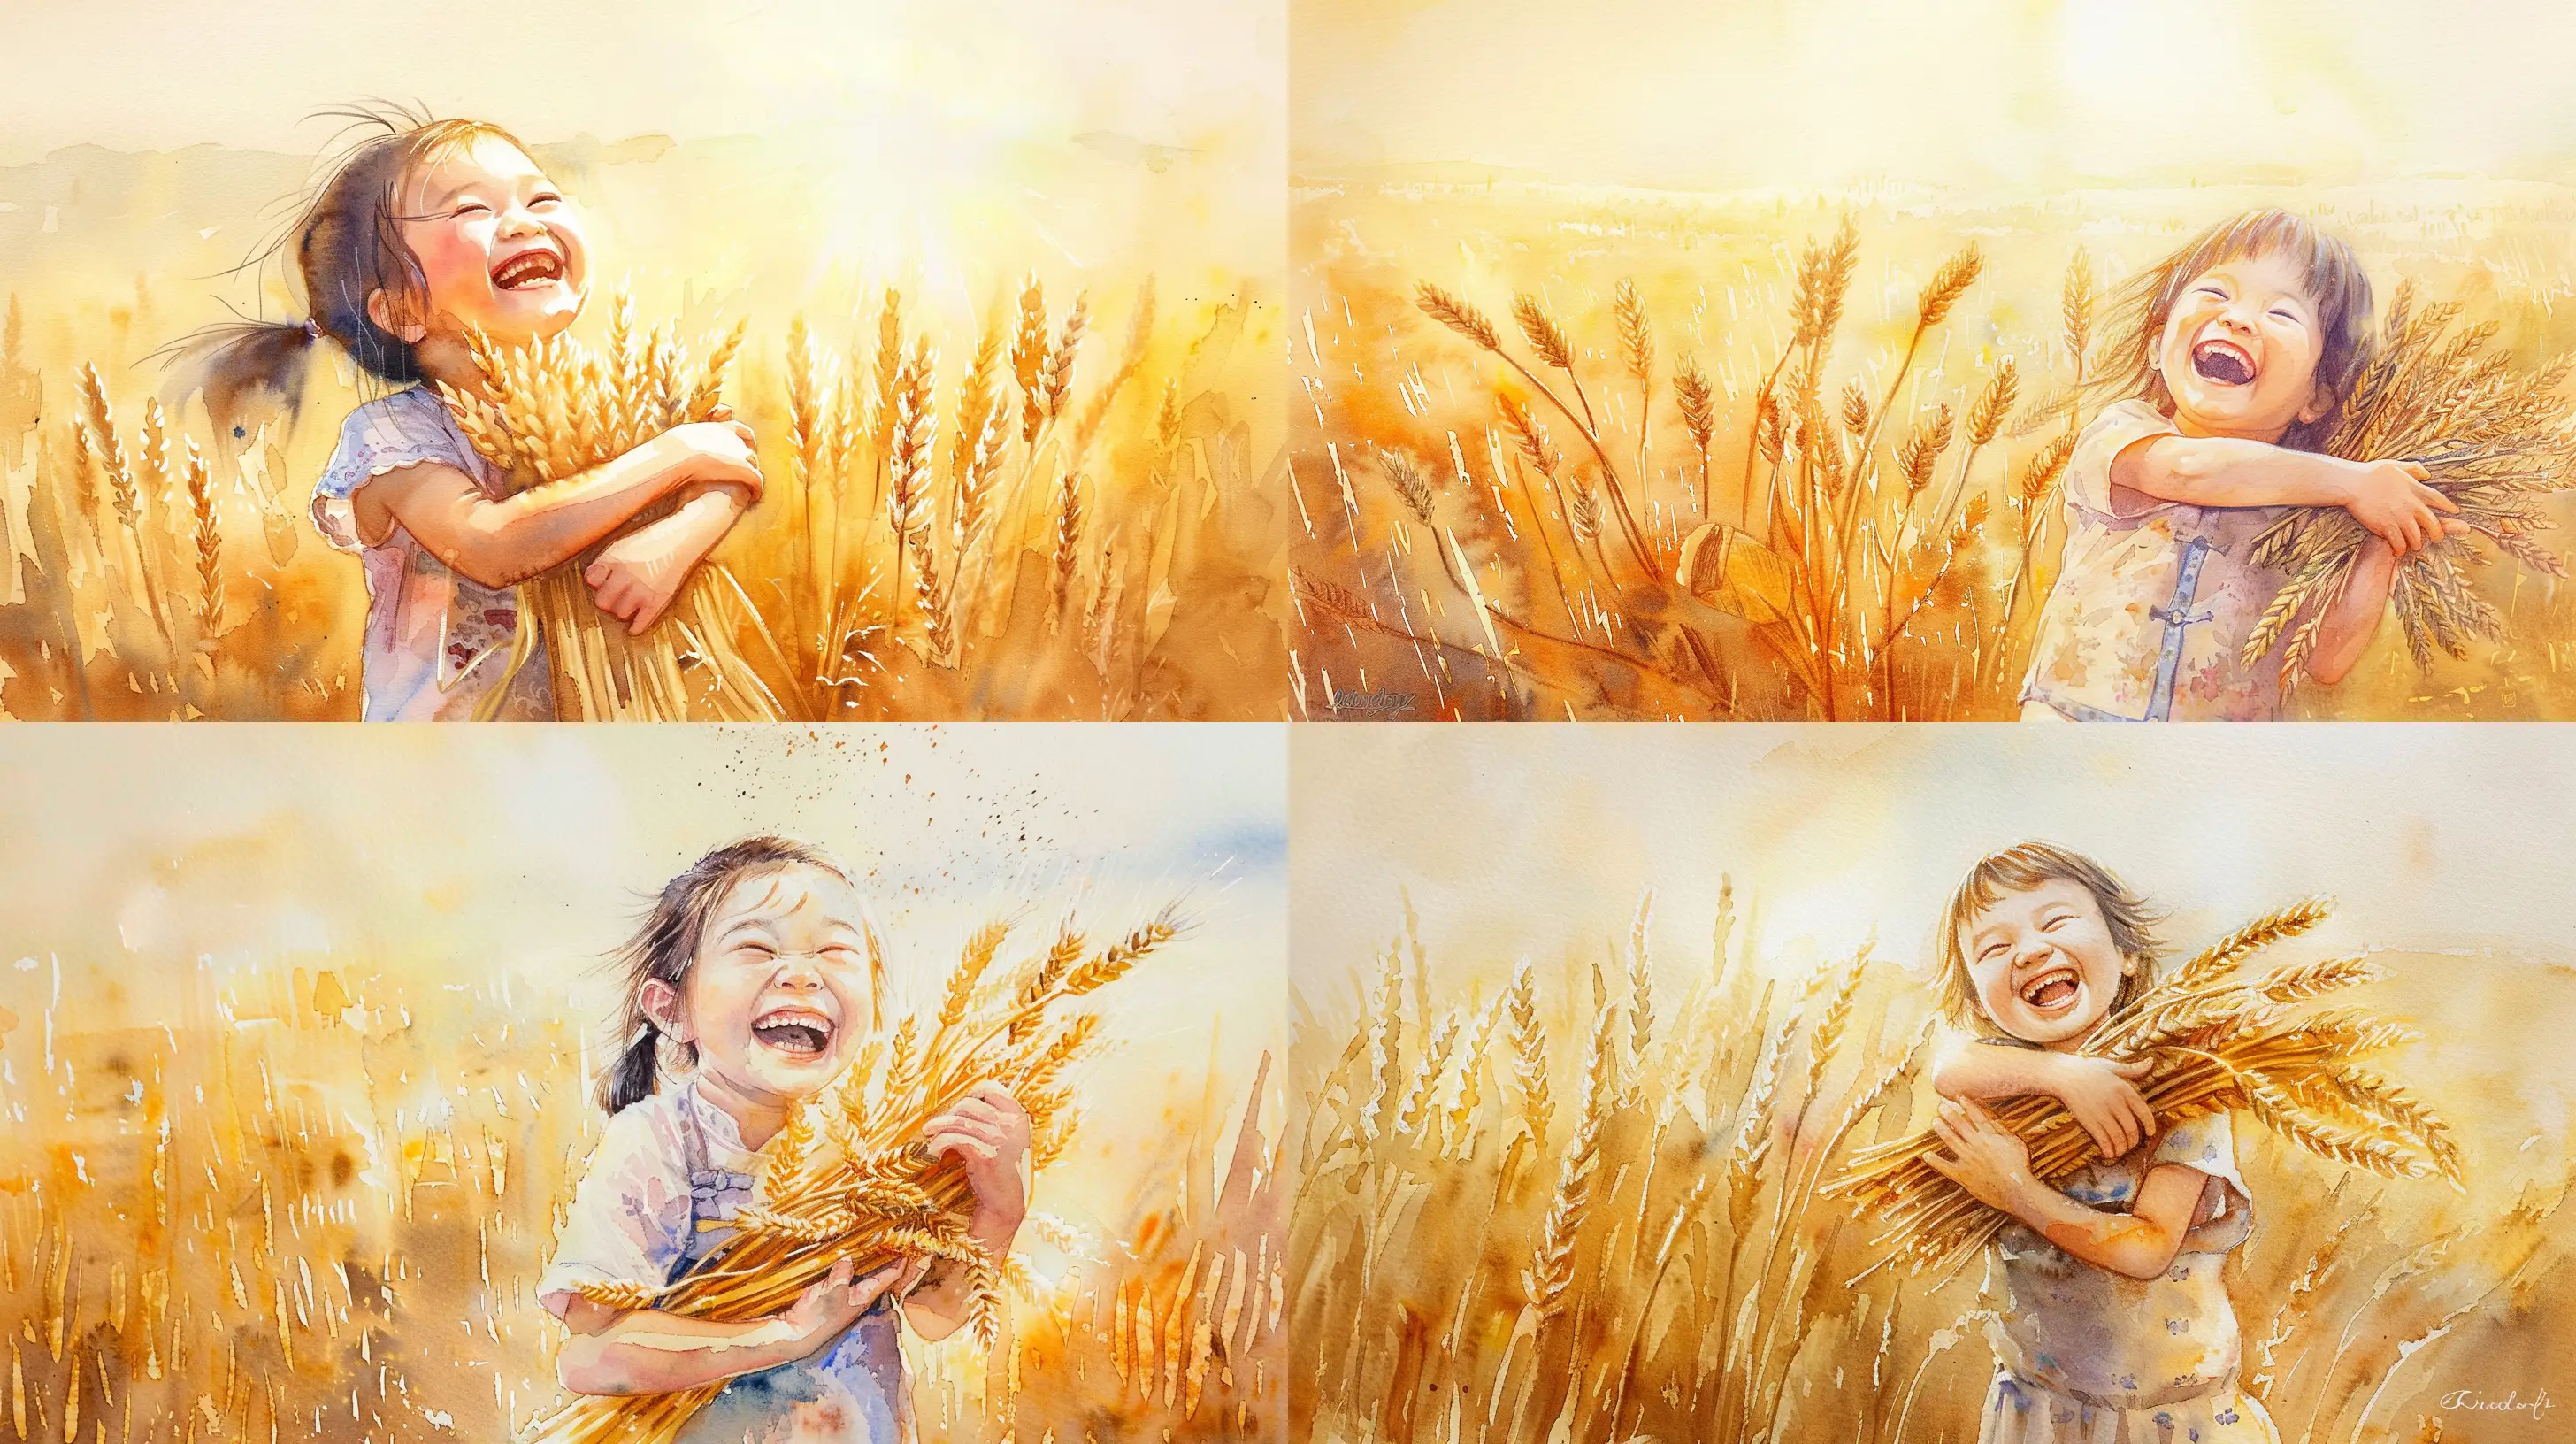 Joyful-Chinese-Girl-Embracing-Wheat-in-Golden-Field-Watercolor-Painting